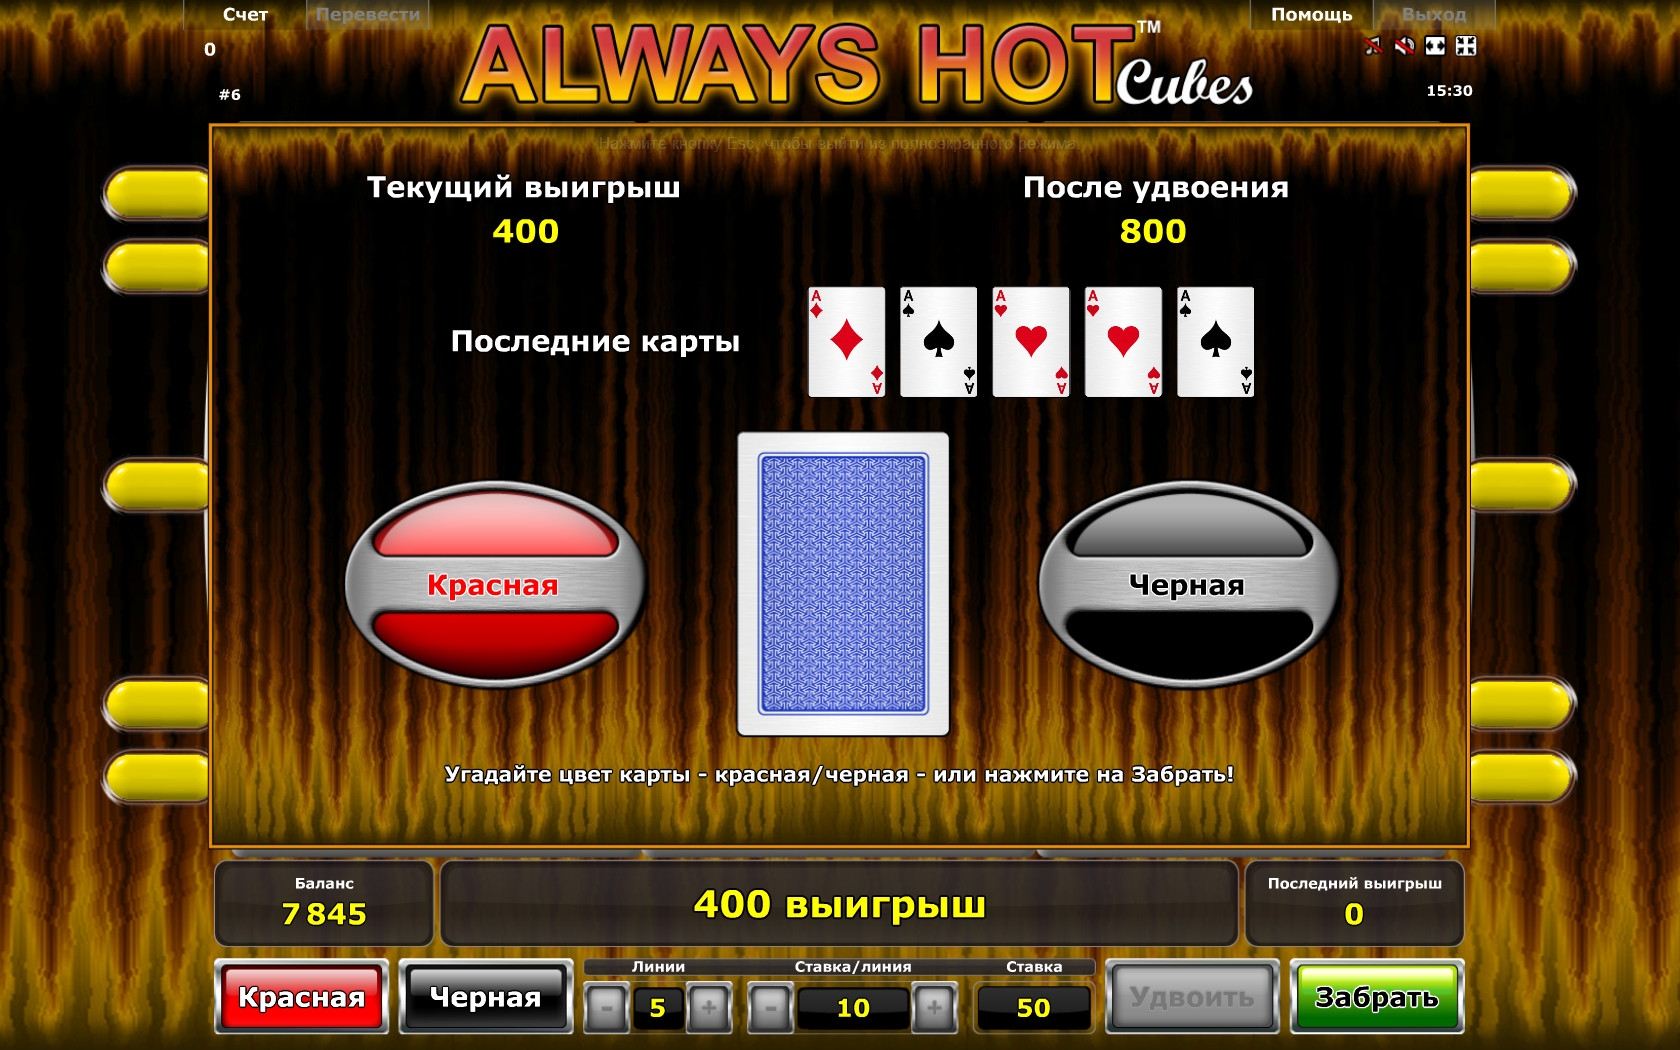 always hot cubes slot machines online in the philippines